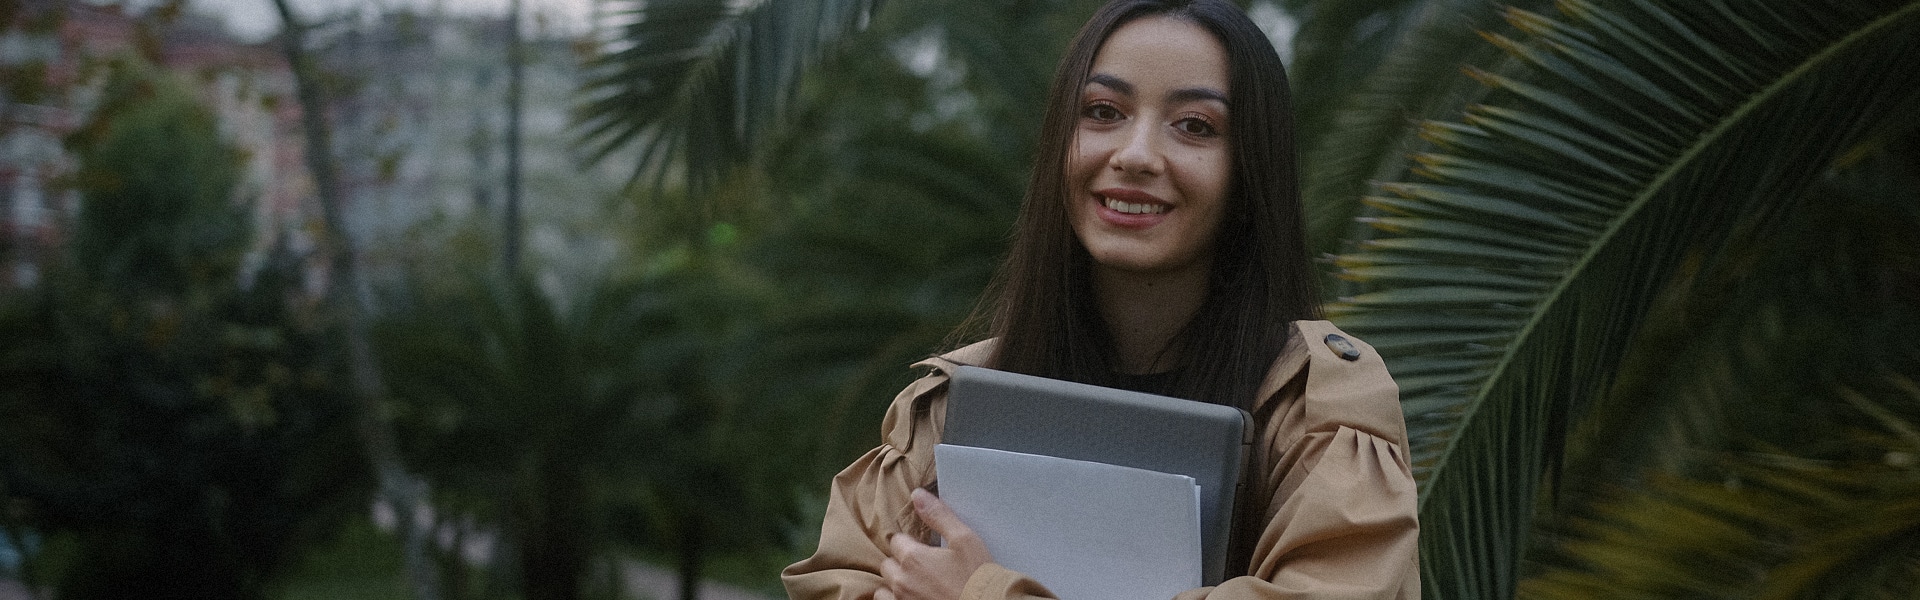 A student holding a laptop and papers